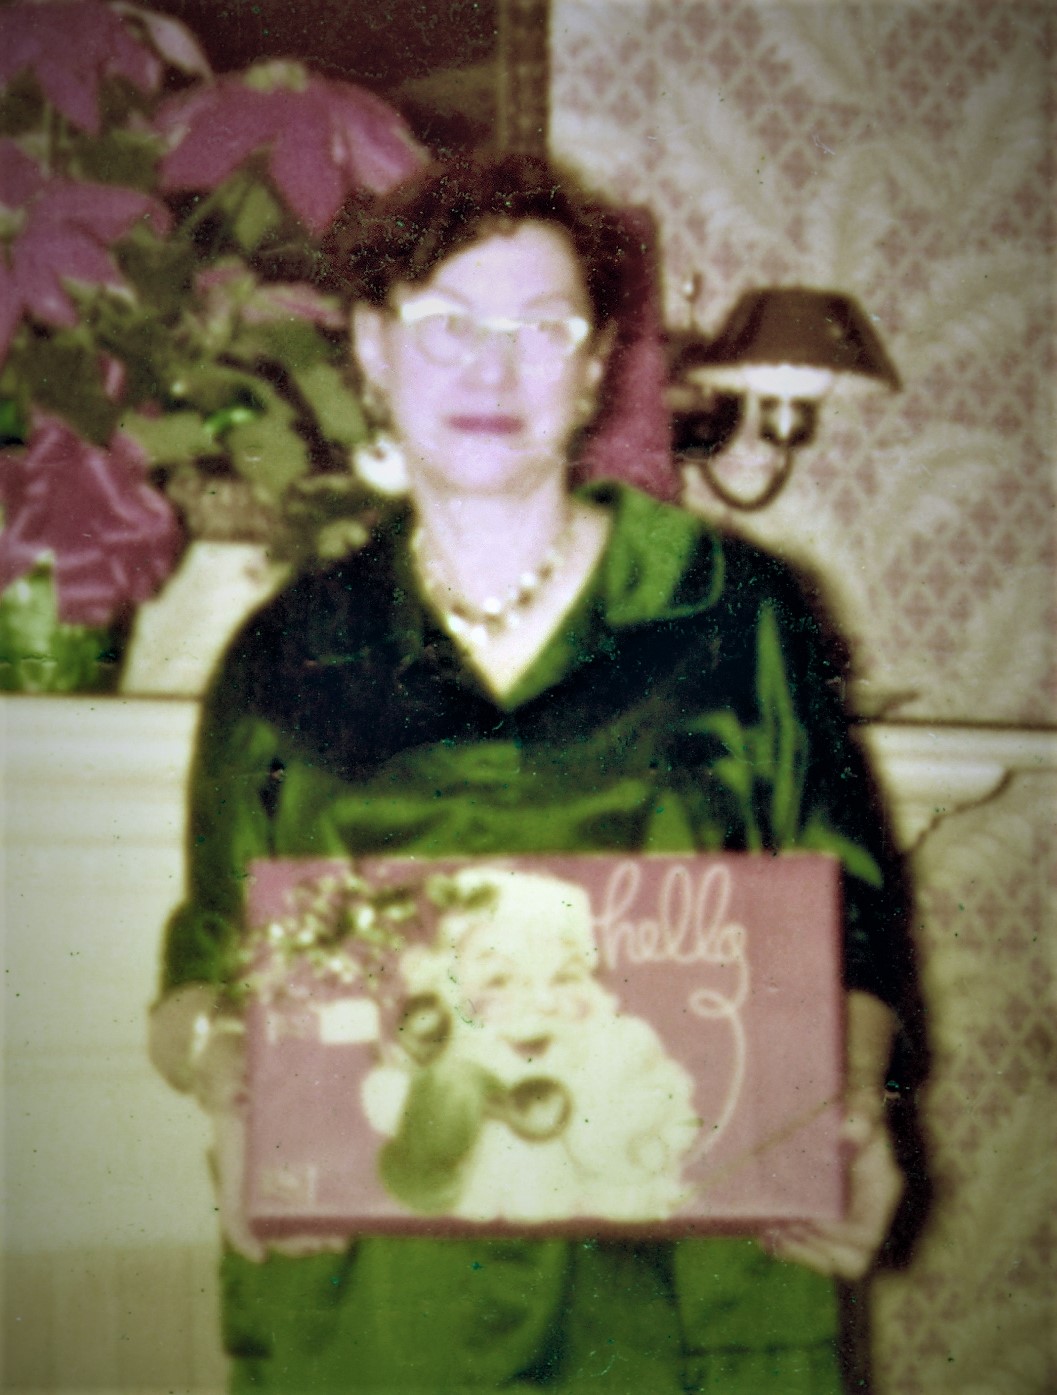 After Hazel Weisse retired, she continued to live in the garage apartment behind the Sunset Lodge building that was purchased by Jack and Bettye Marsh as their home. In this picture taken in 1970, Hazel holds a Christmas present. The picture is owned by Tammy Marsh Foxworth who was 12 years old when her parents bought the Sunset Lodge building.